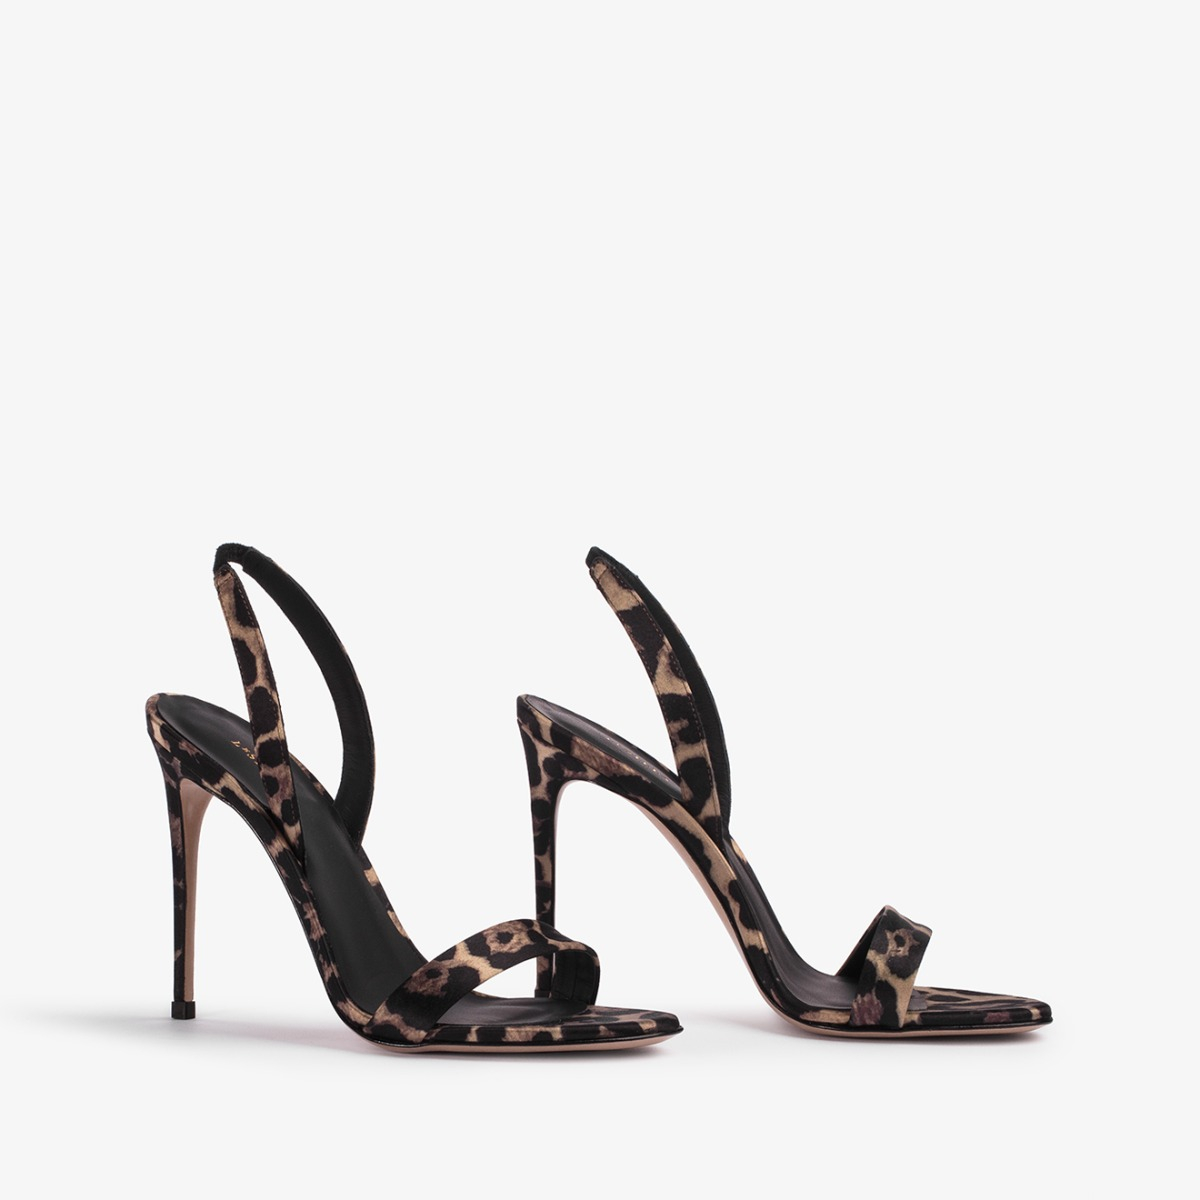 MADISON SANDAL 105 mm - Le Silla | Official Online Store